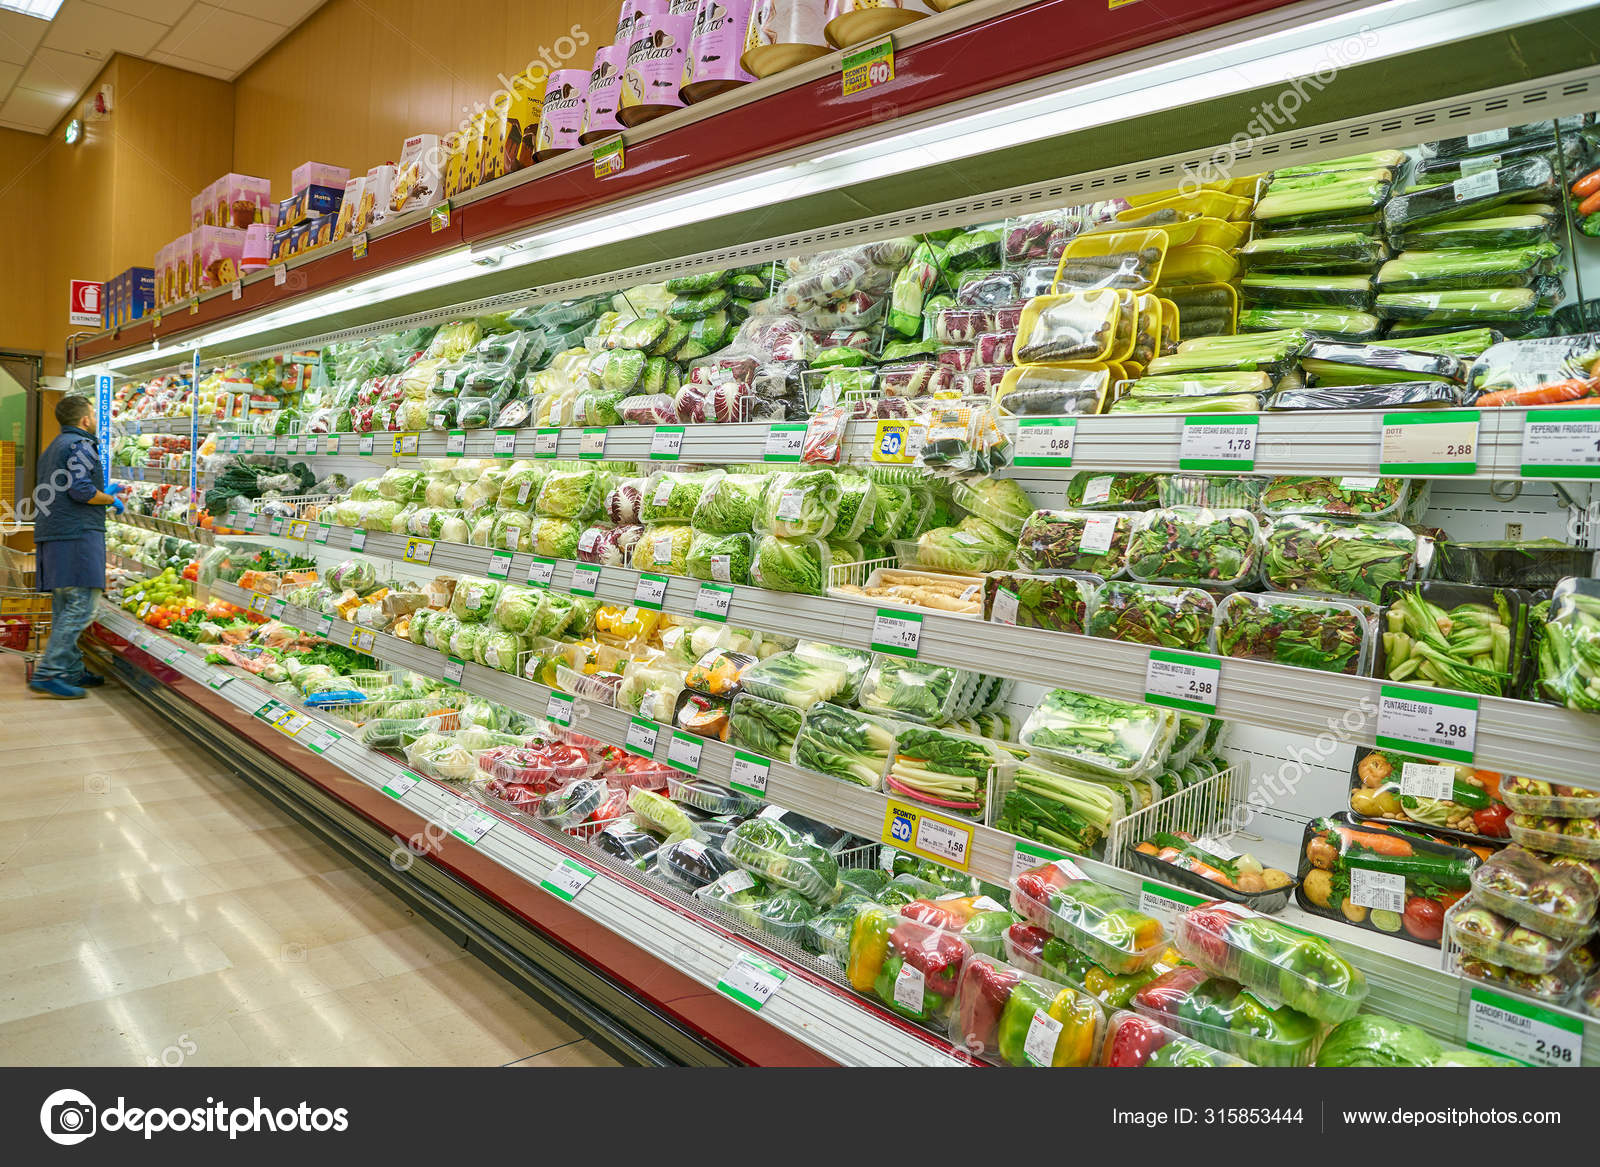  Grocery shop  Stock Editorial Photo  teamtime 315853444